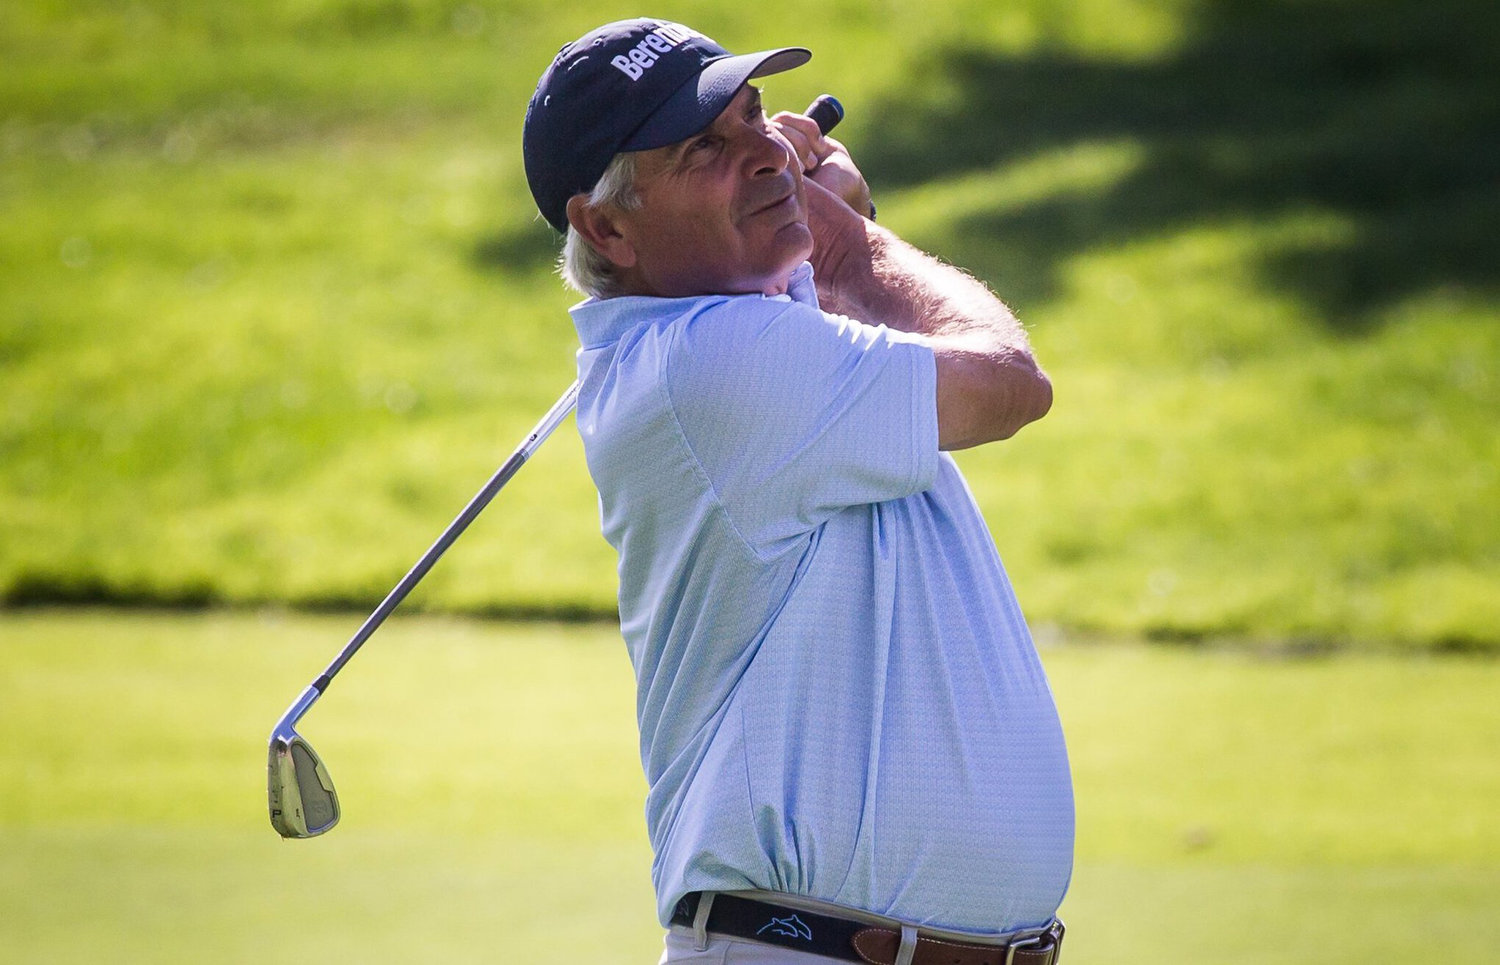 Fred Couples watches his ball after a drive late in the day during the final day of the Boeing Classic in 2019.